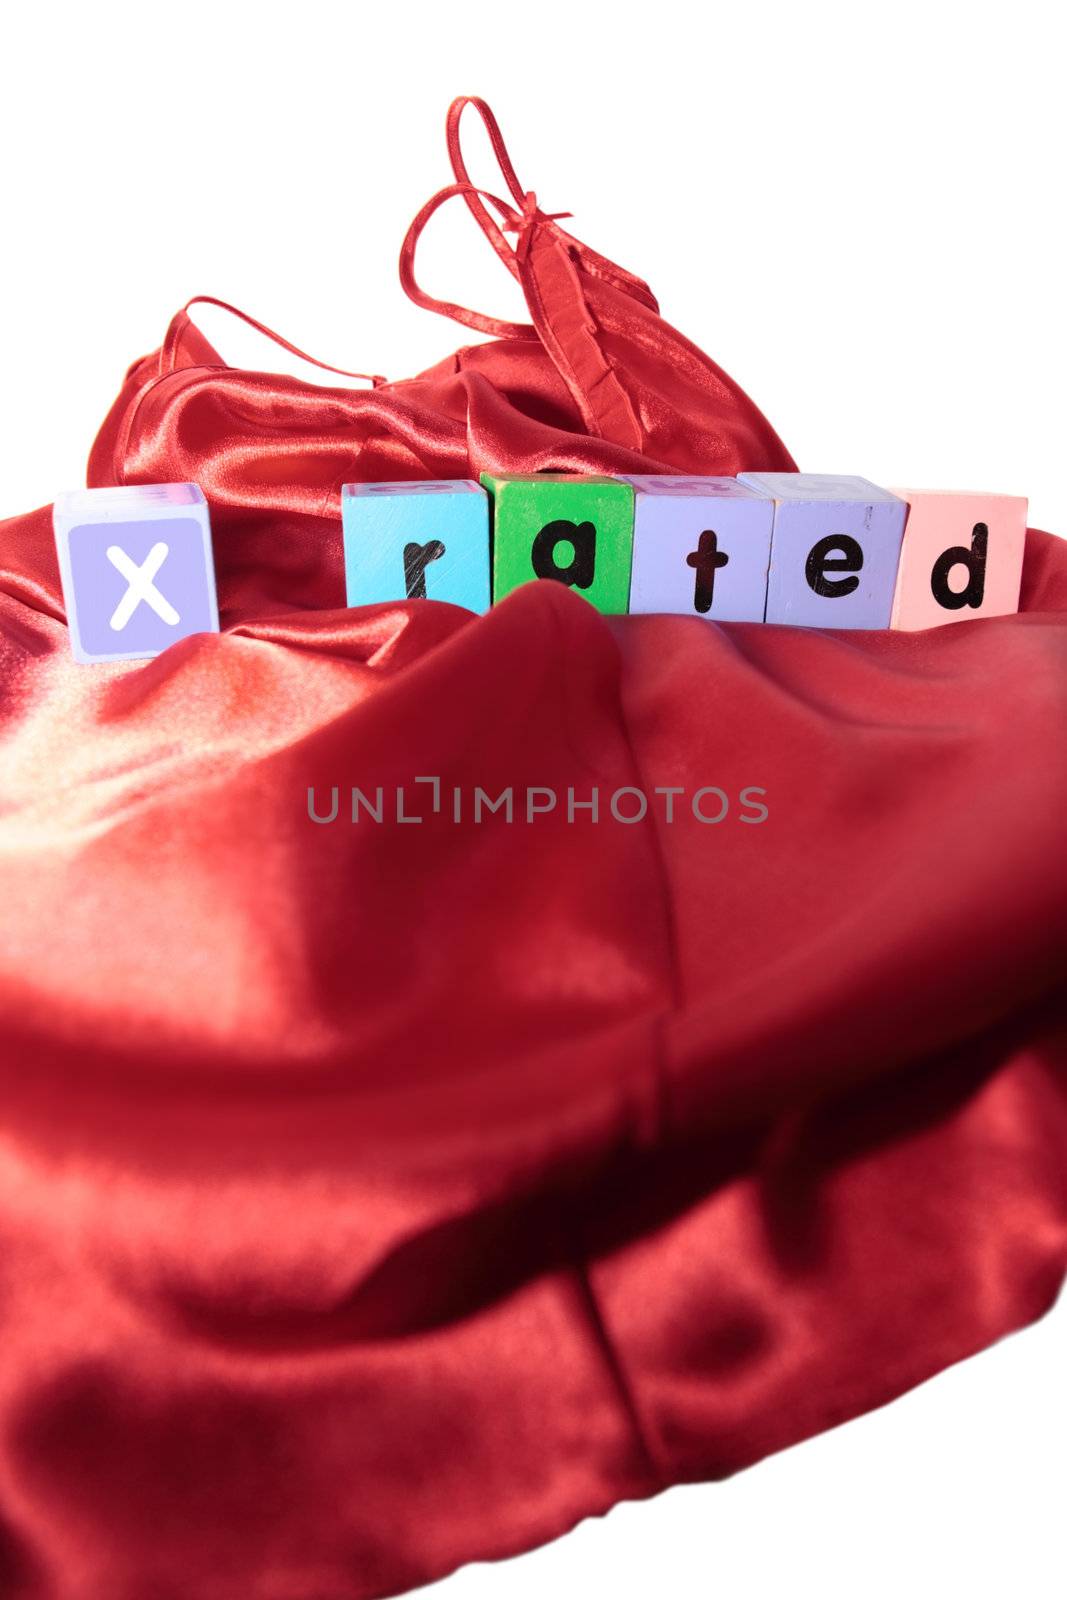 x rated on letter blocks on silk nightie by morrbyte